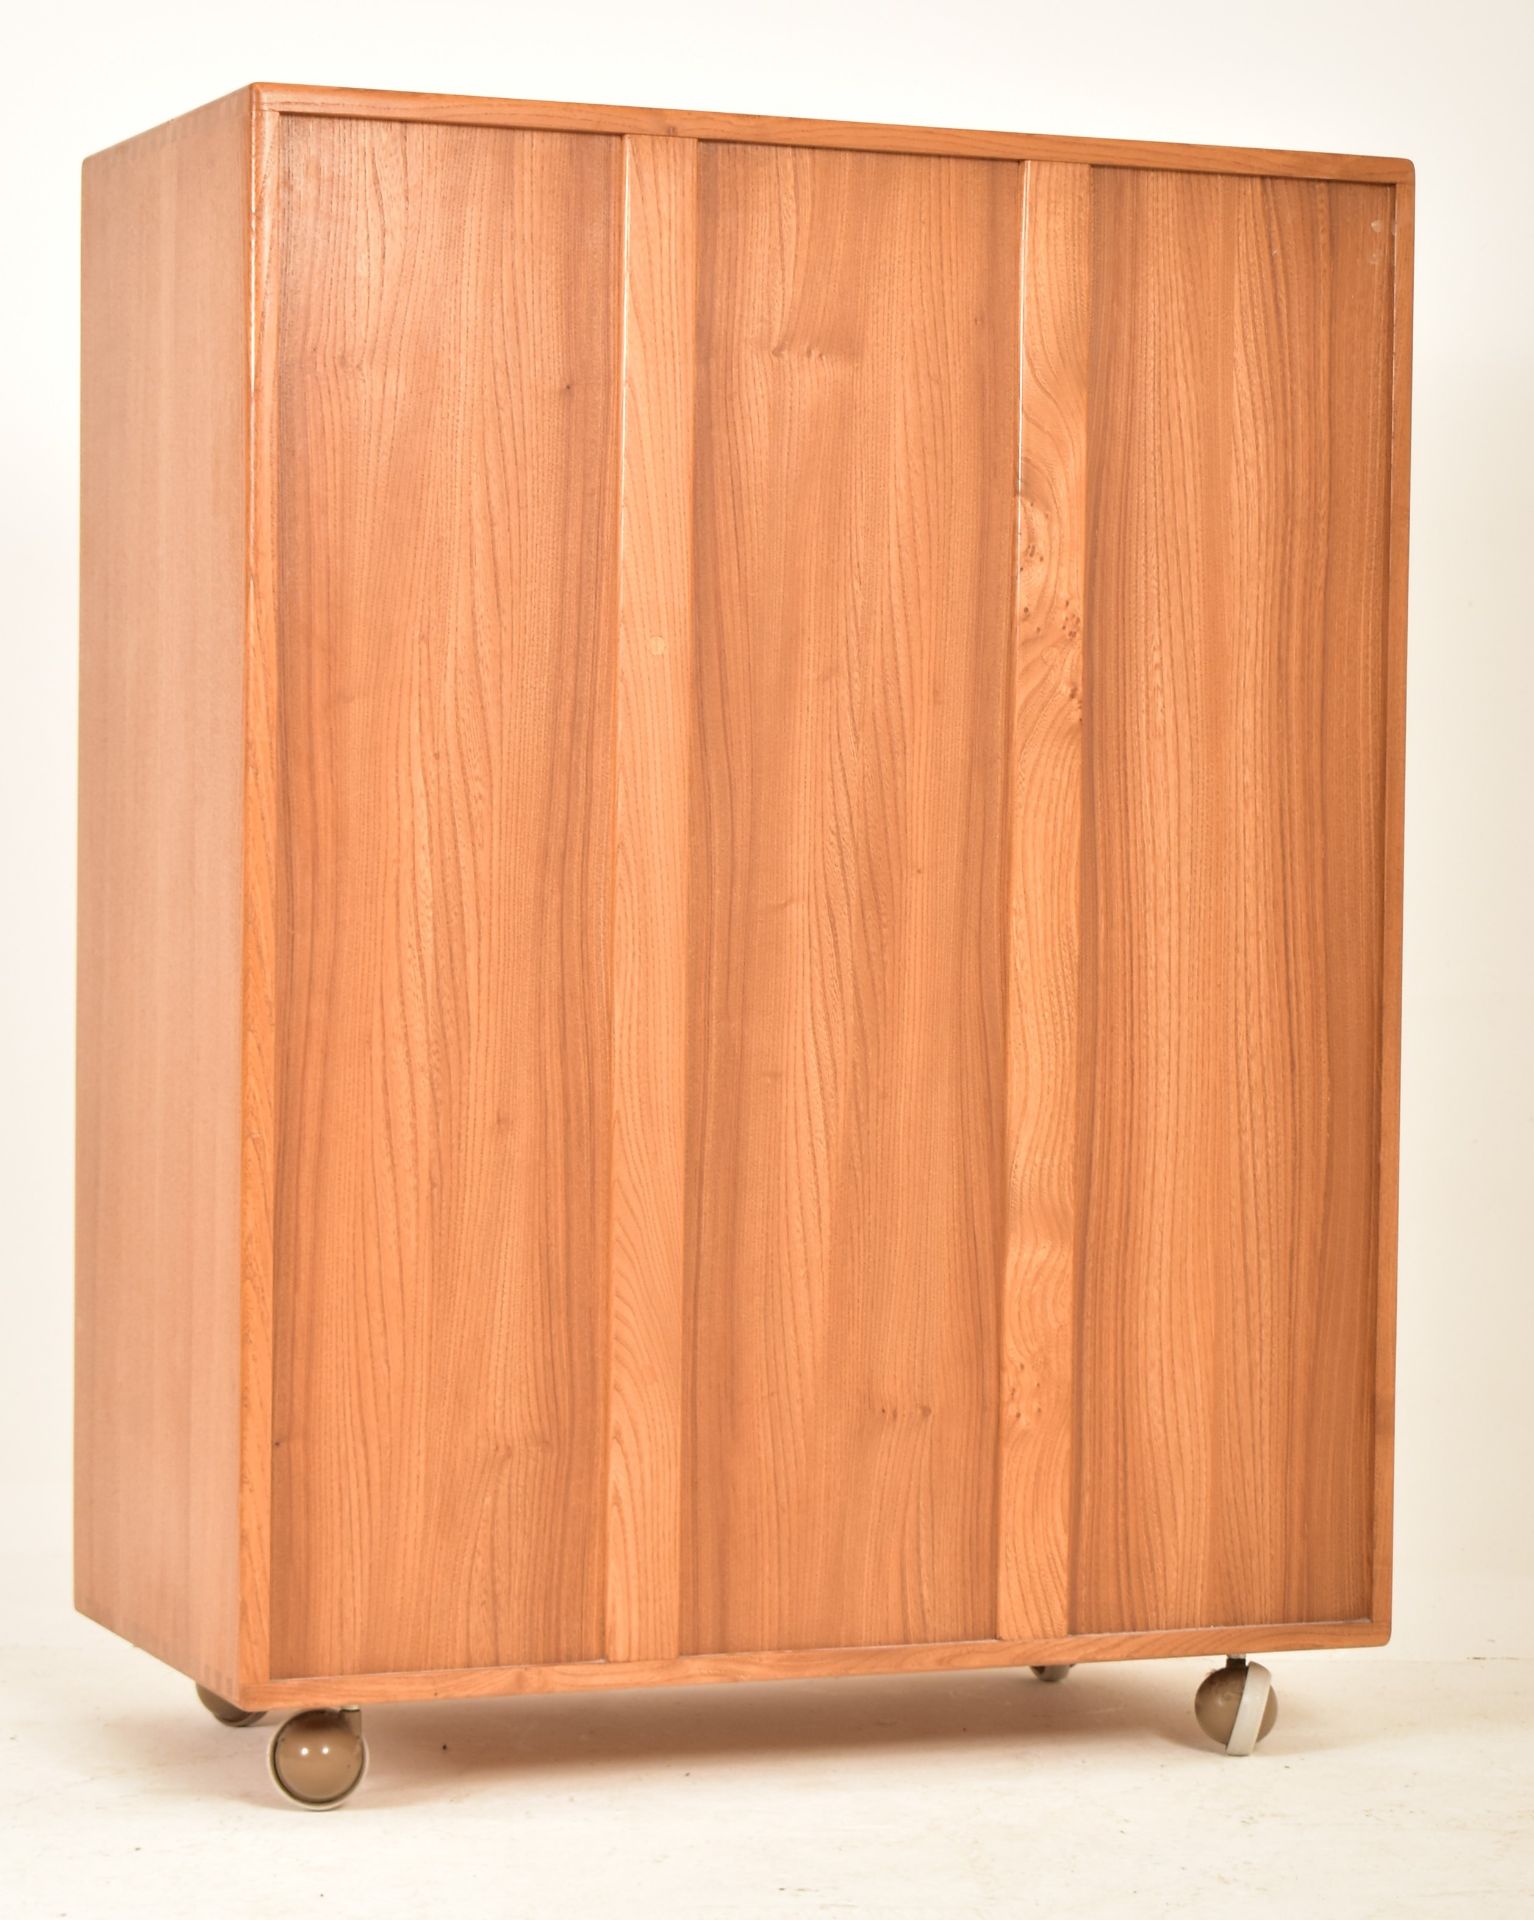 ERCOL - MODEL 469 - 1960S BEECH AND ELM SERVING CABINET - Image 6 of 6